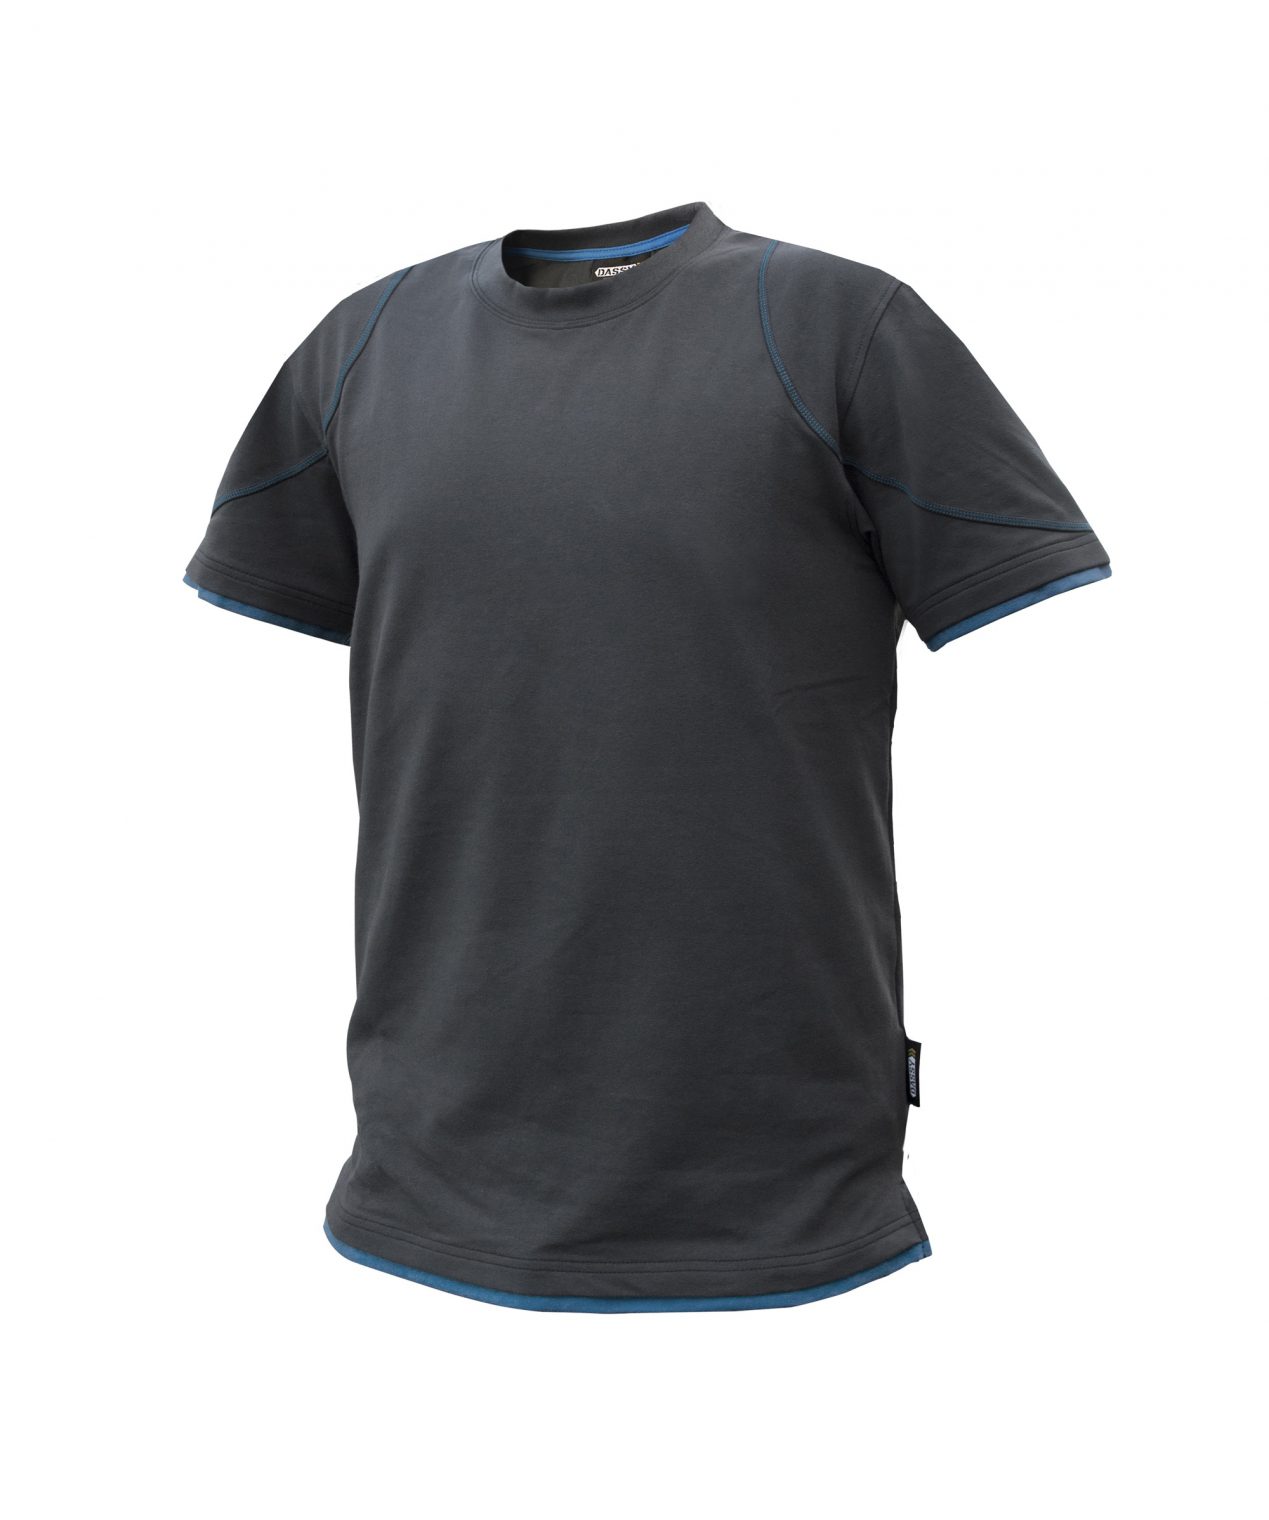 kinetic t shirt anthracite grey azure blue front